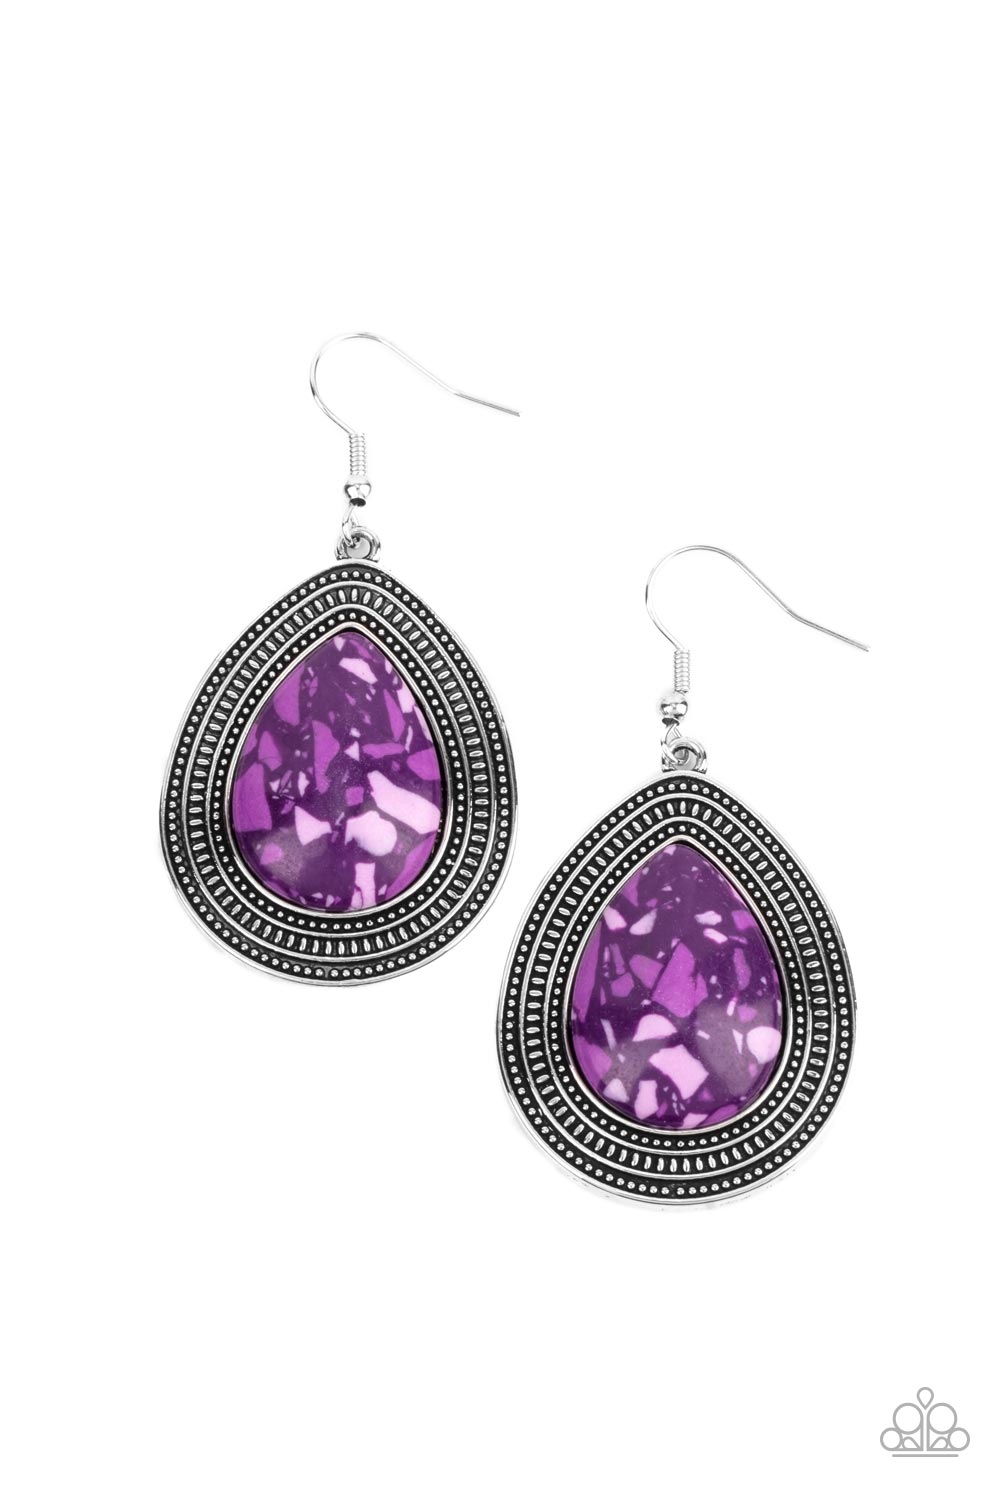 Terrazzo Tundra - Purple and Silver Fashion Earrings - Paparazzi Accessories - Featuring a colorful terrazzo pattern, a purple teardrop stone is pressed into the center of a silver frame studded and embossed in borders of tribal inspired textures. Earring attaches to a standard fishhook fitting. Sold as one pair of earrings.